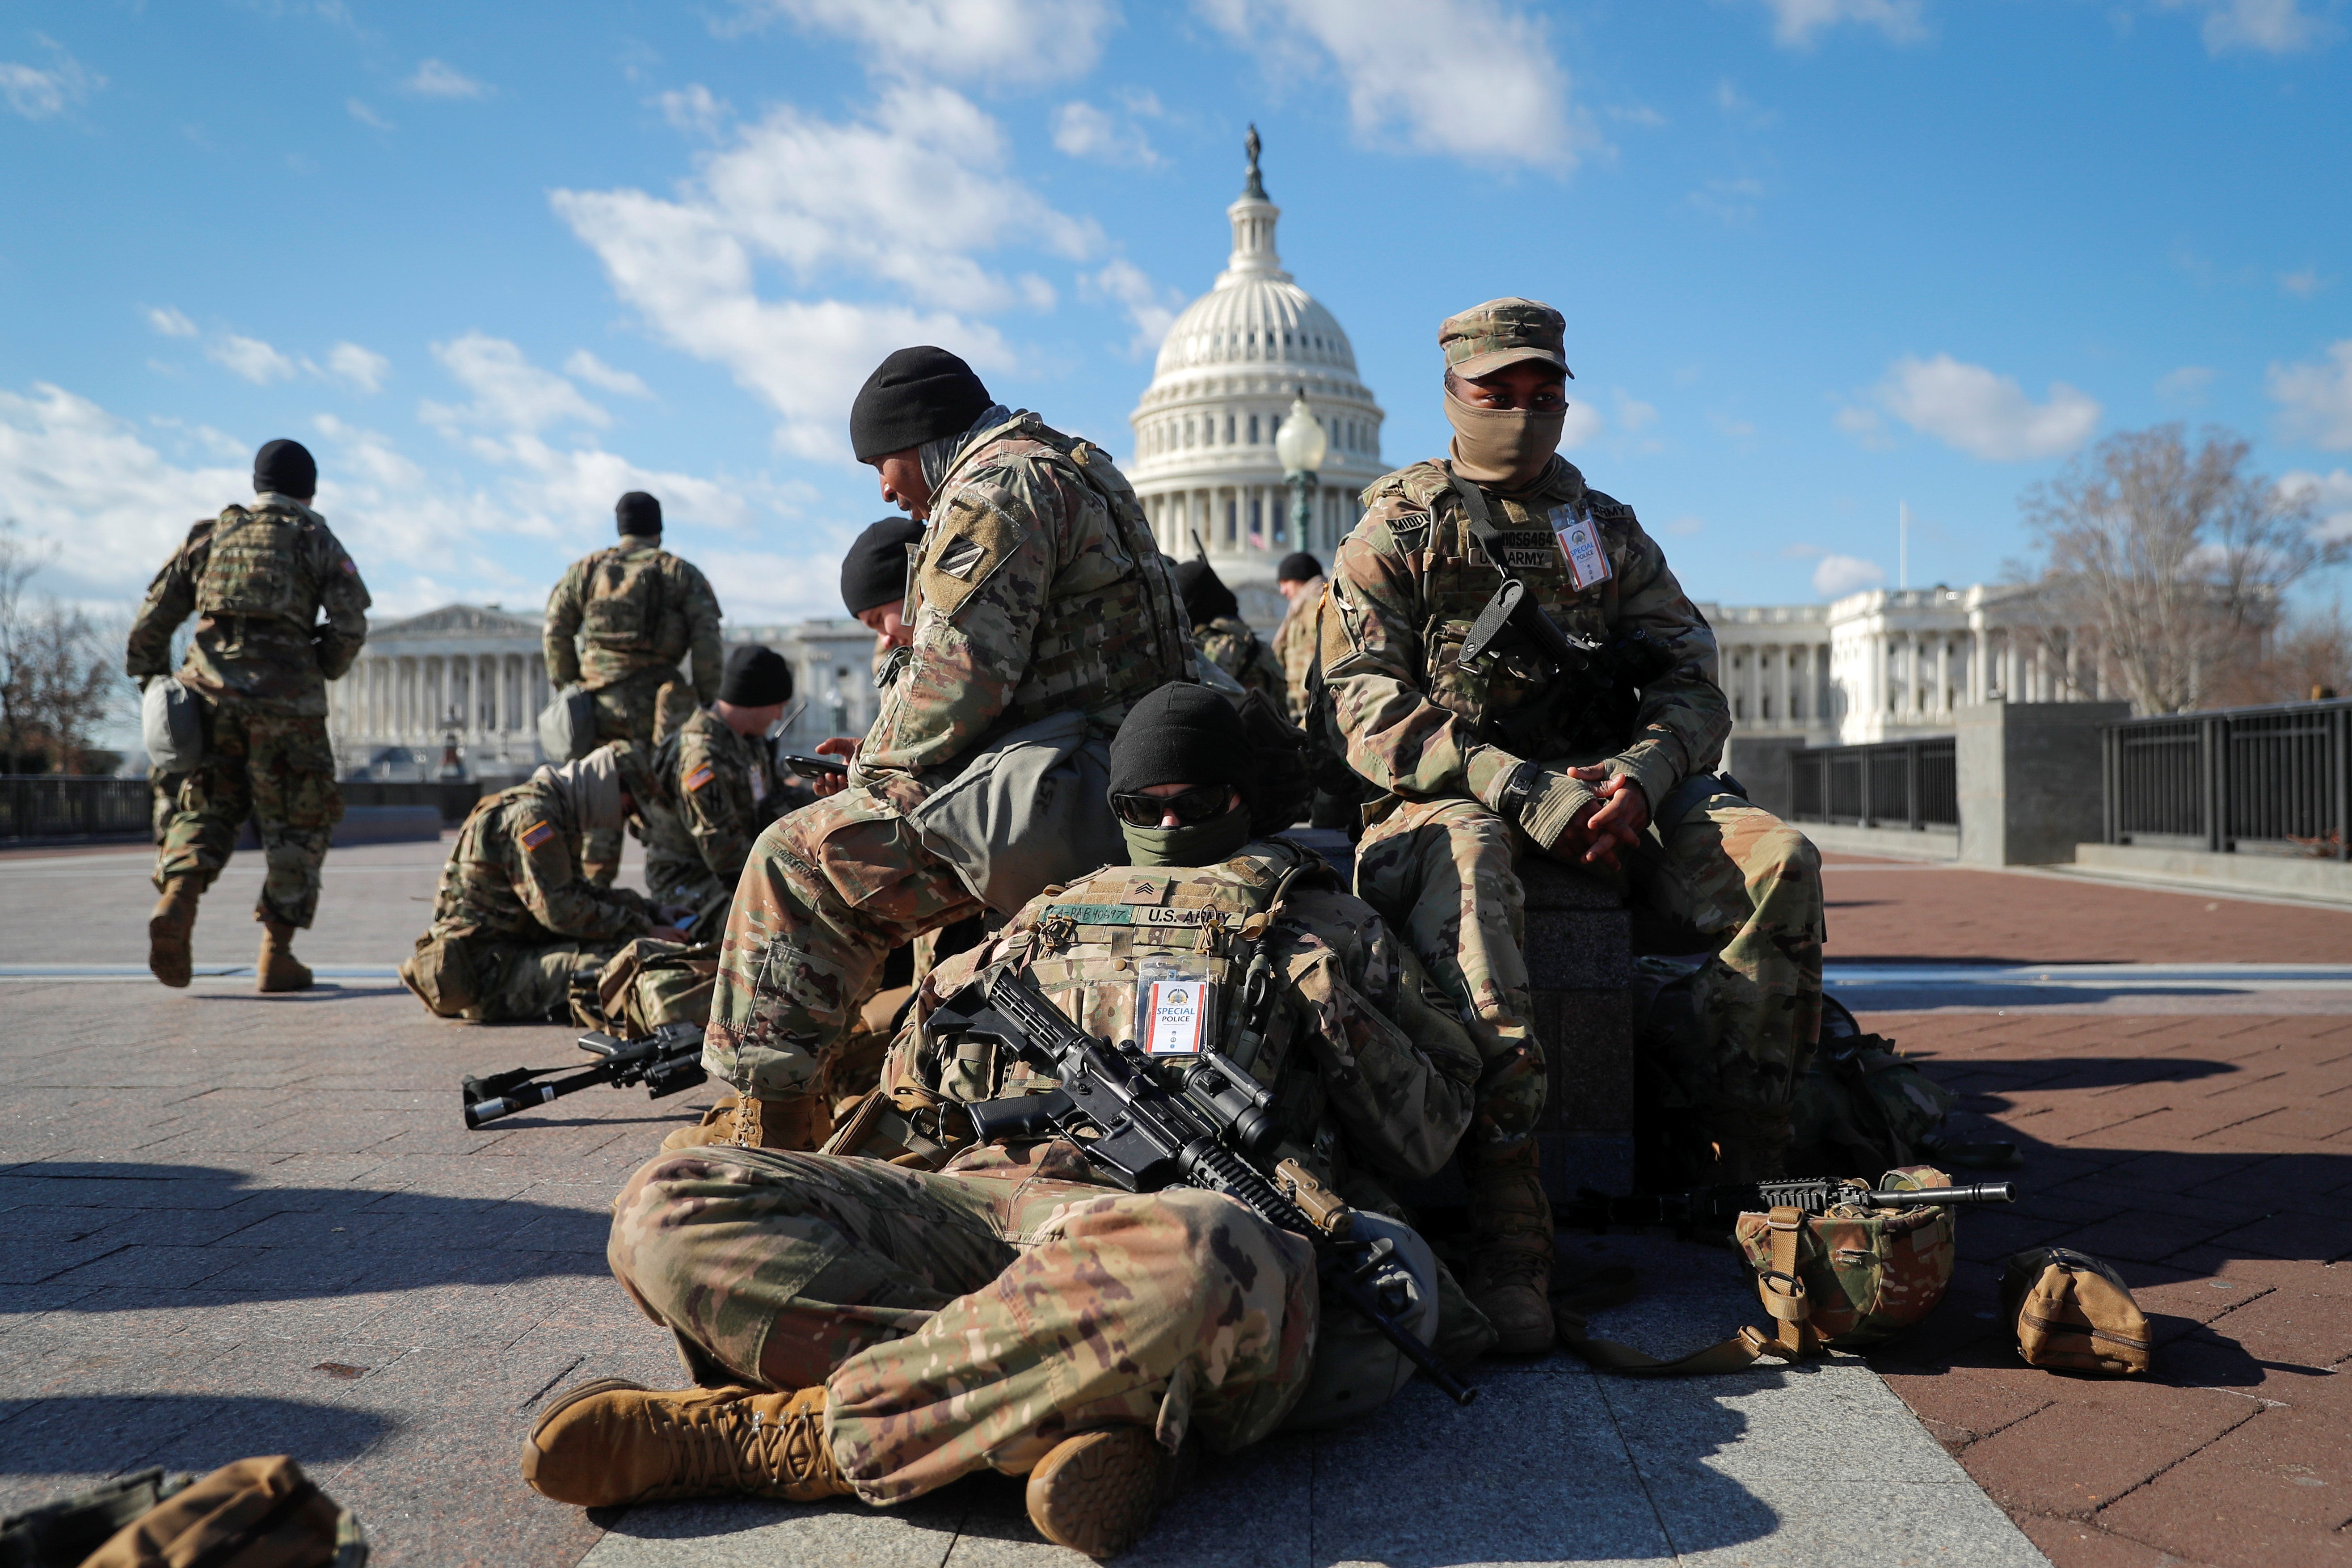 National Guard troops gather in front of the US Capitol in Washington.